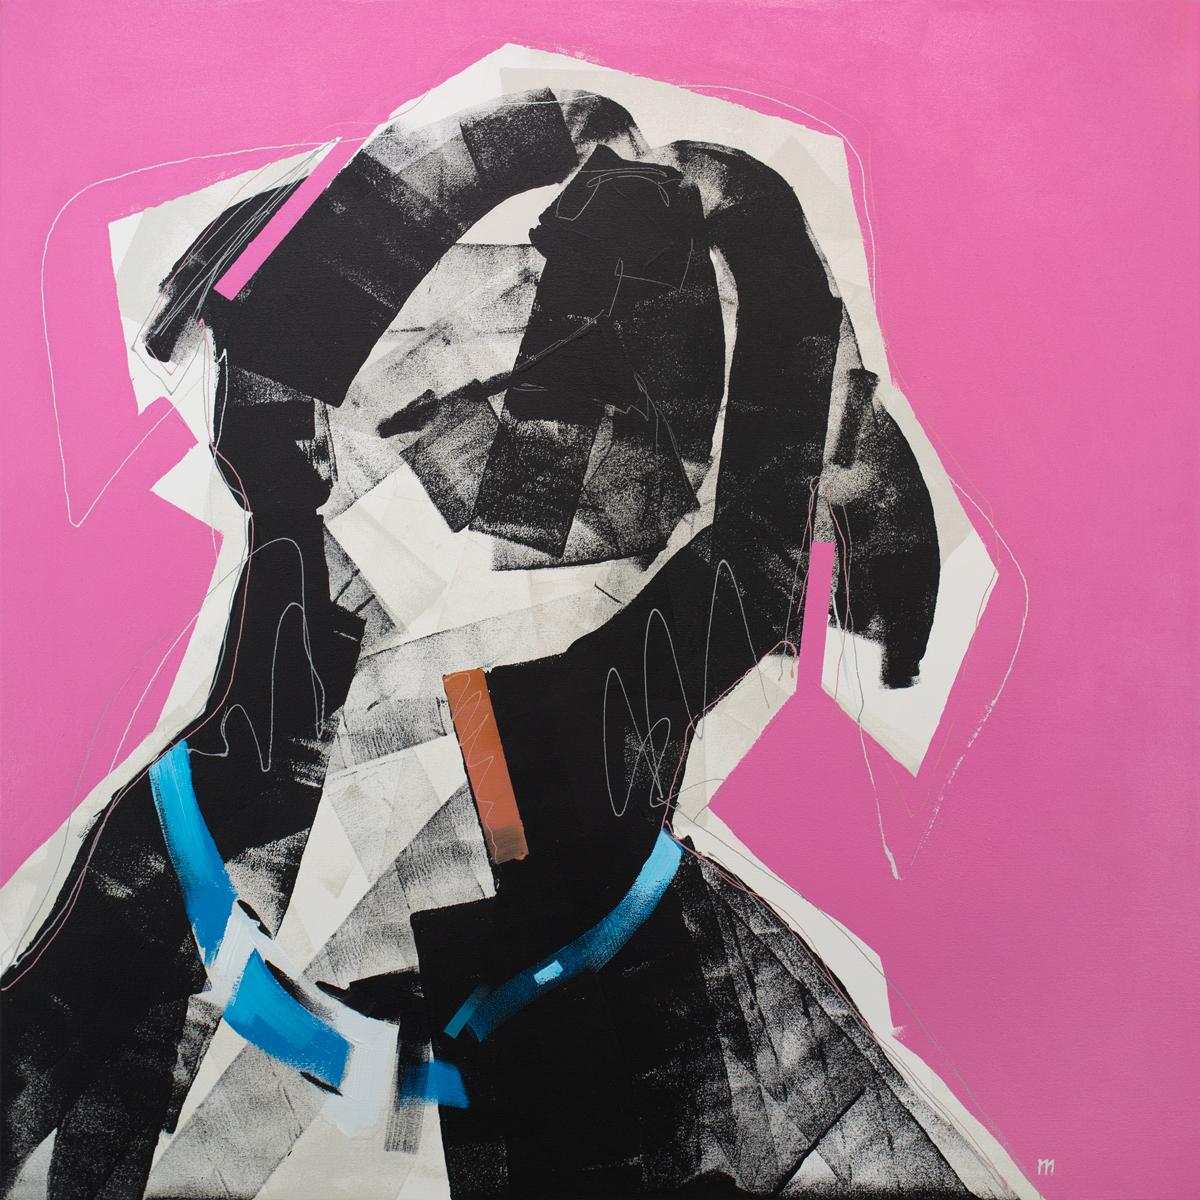 This abstracted painting of a dog by Russell Miyaki features a loose, energetic style and vibrant, colorful palette. The artist layers wide brush strokes and thin lines to create a black and white dog's form from the shoulders up, wearing a blue